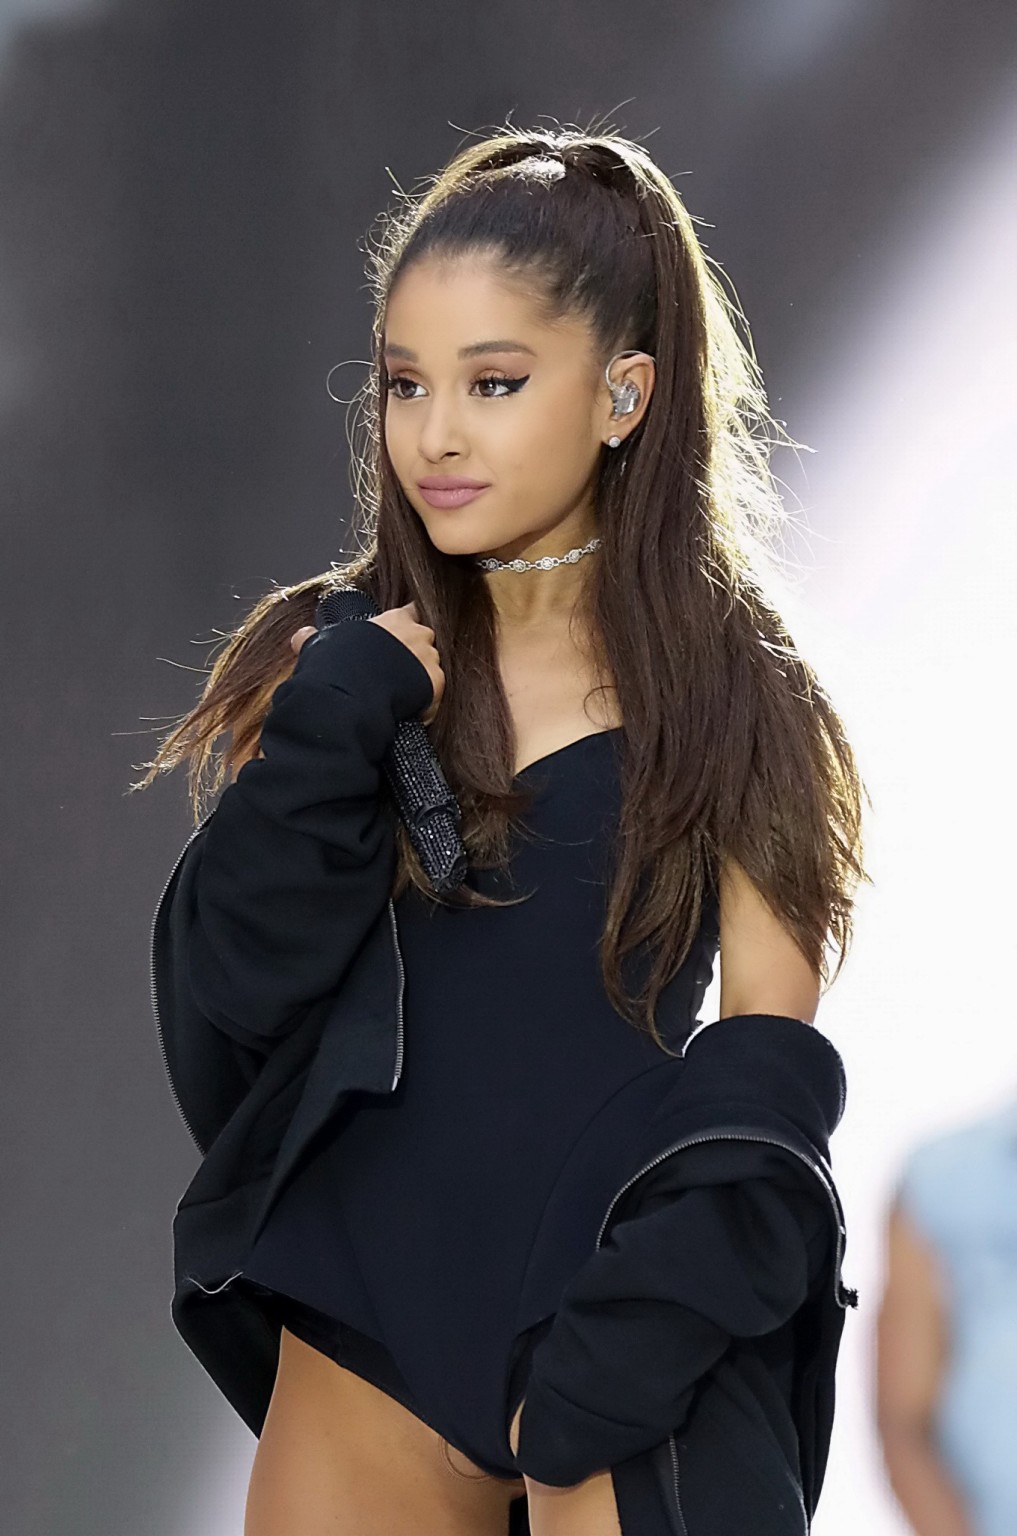 Ariana Grande shows off her shaved pussy in a tiny black outfit while performing #75161899